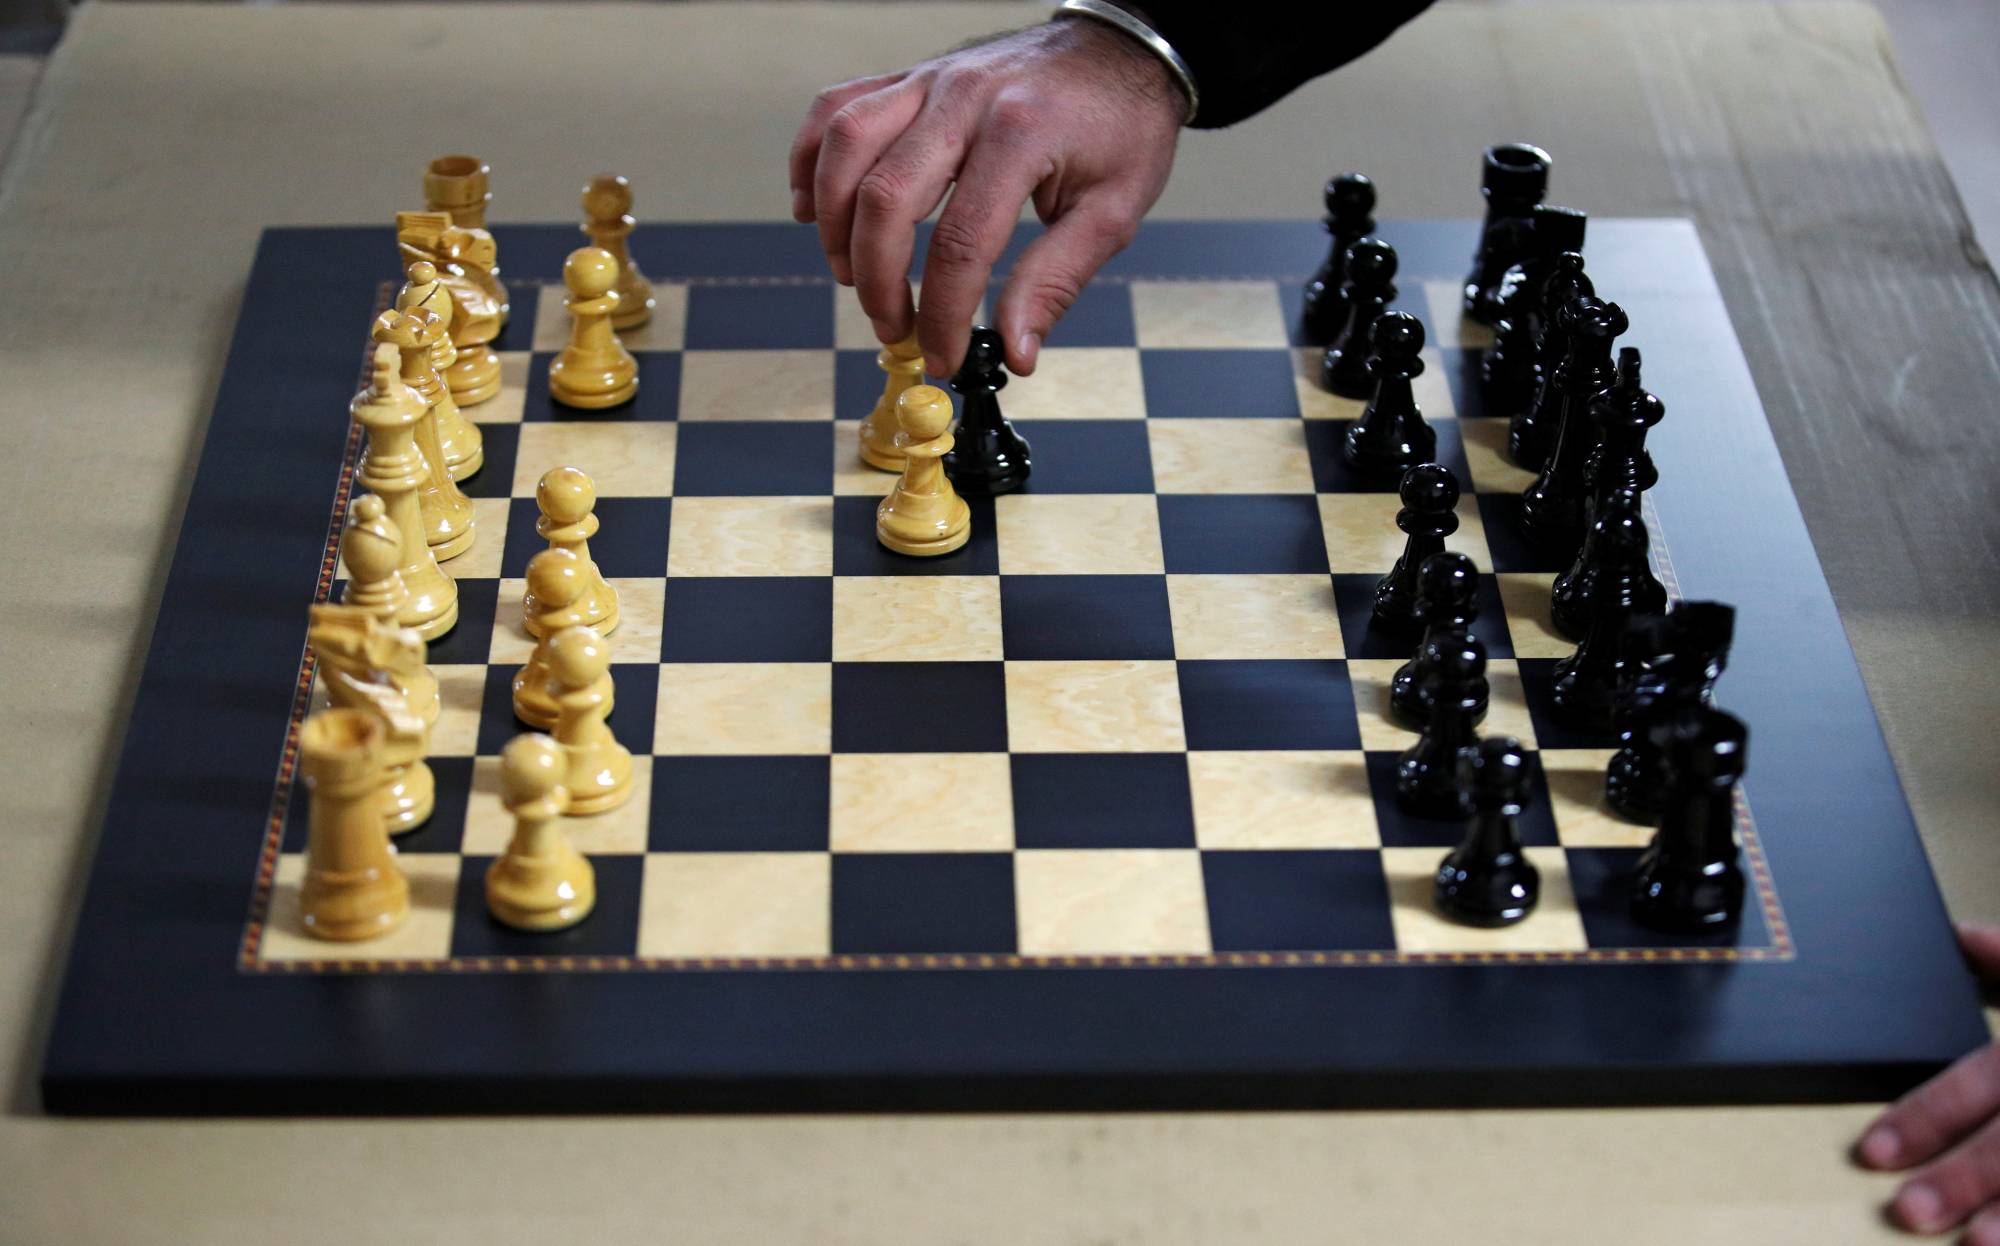 Local chess ace reflects on cheating in wake of global scandal